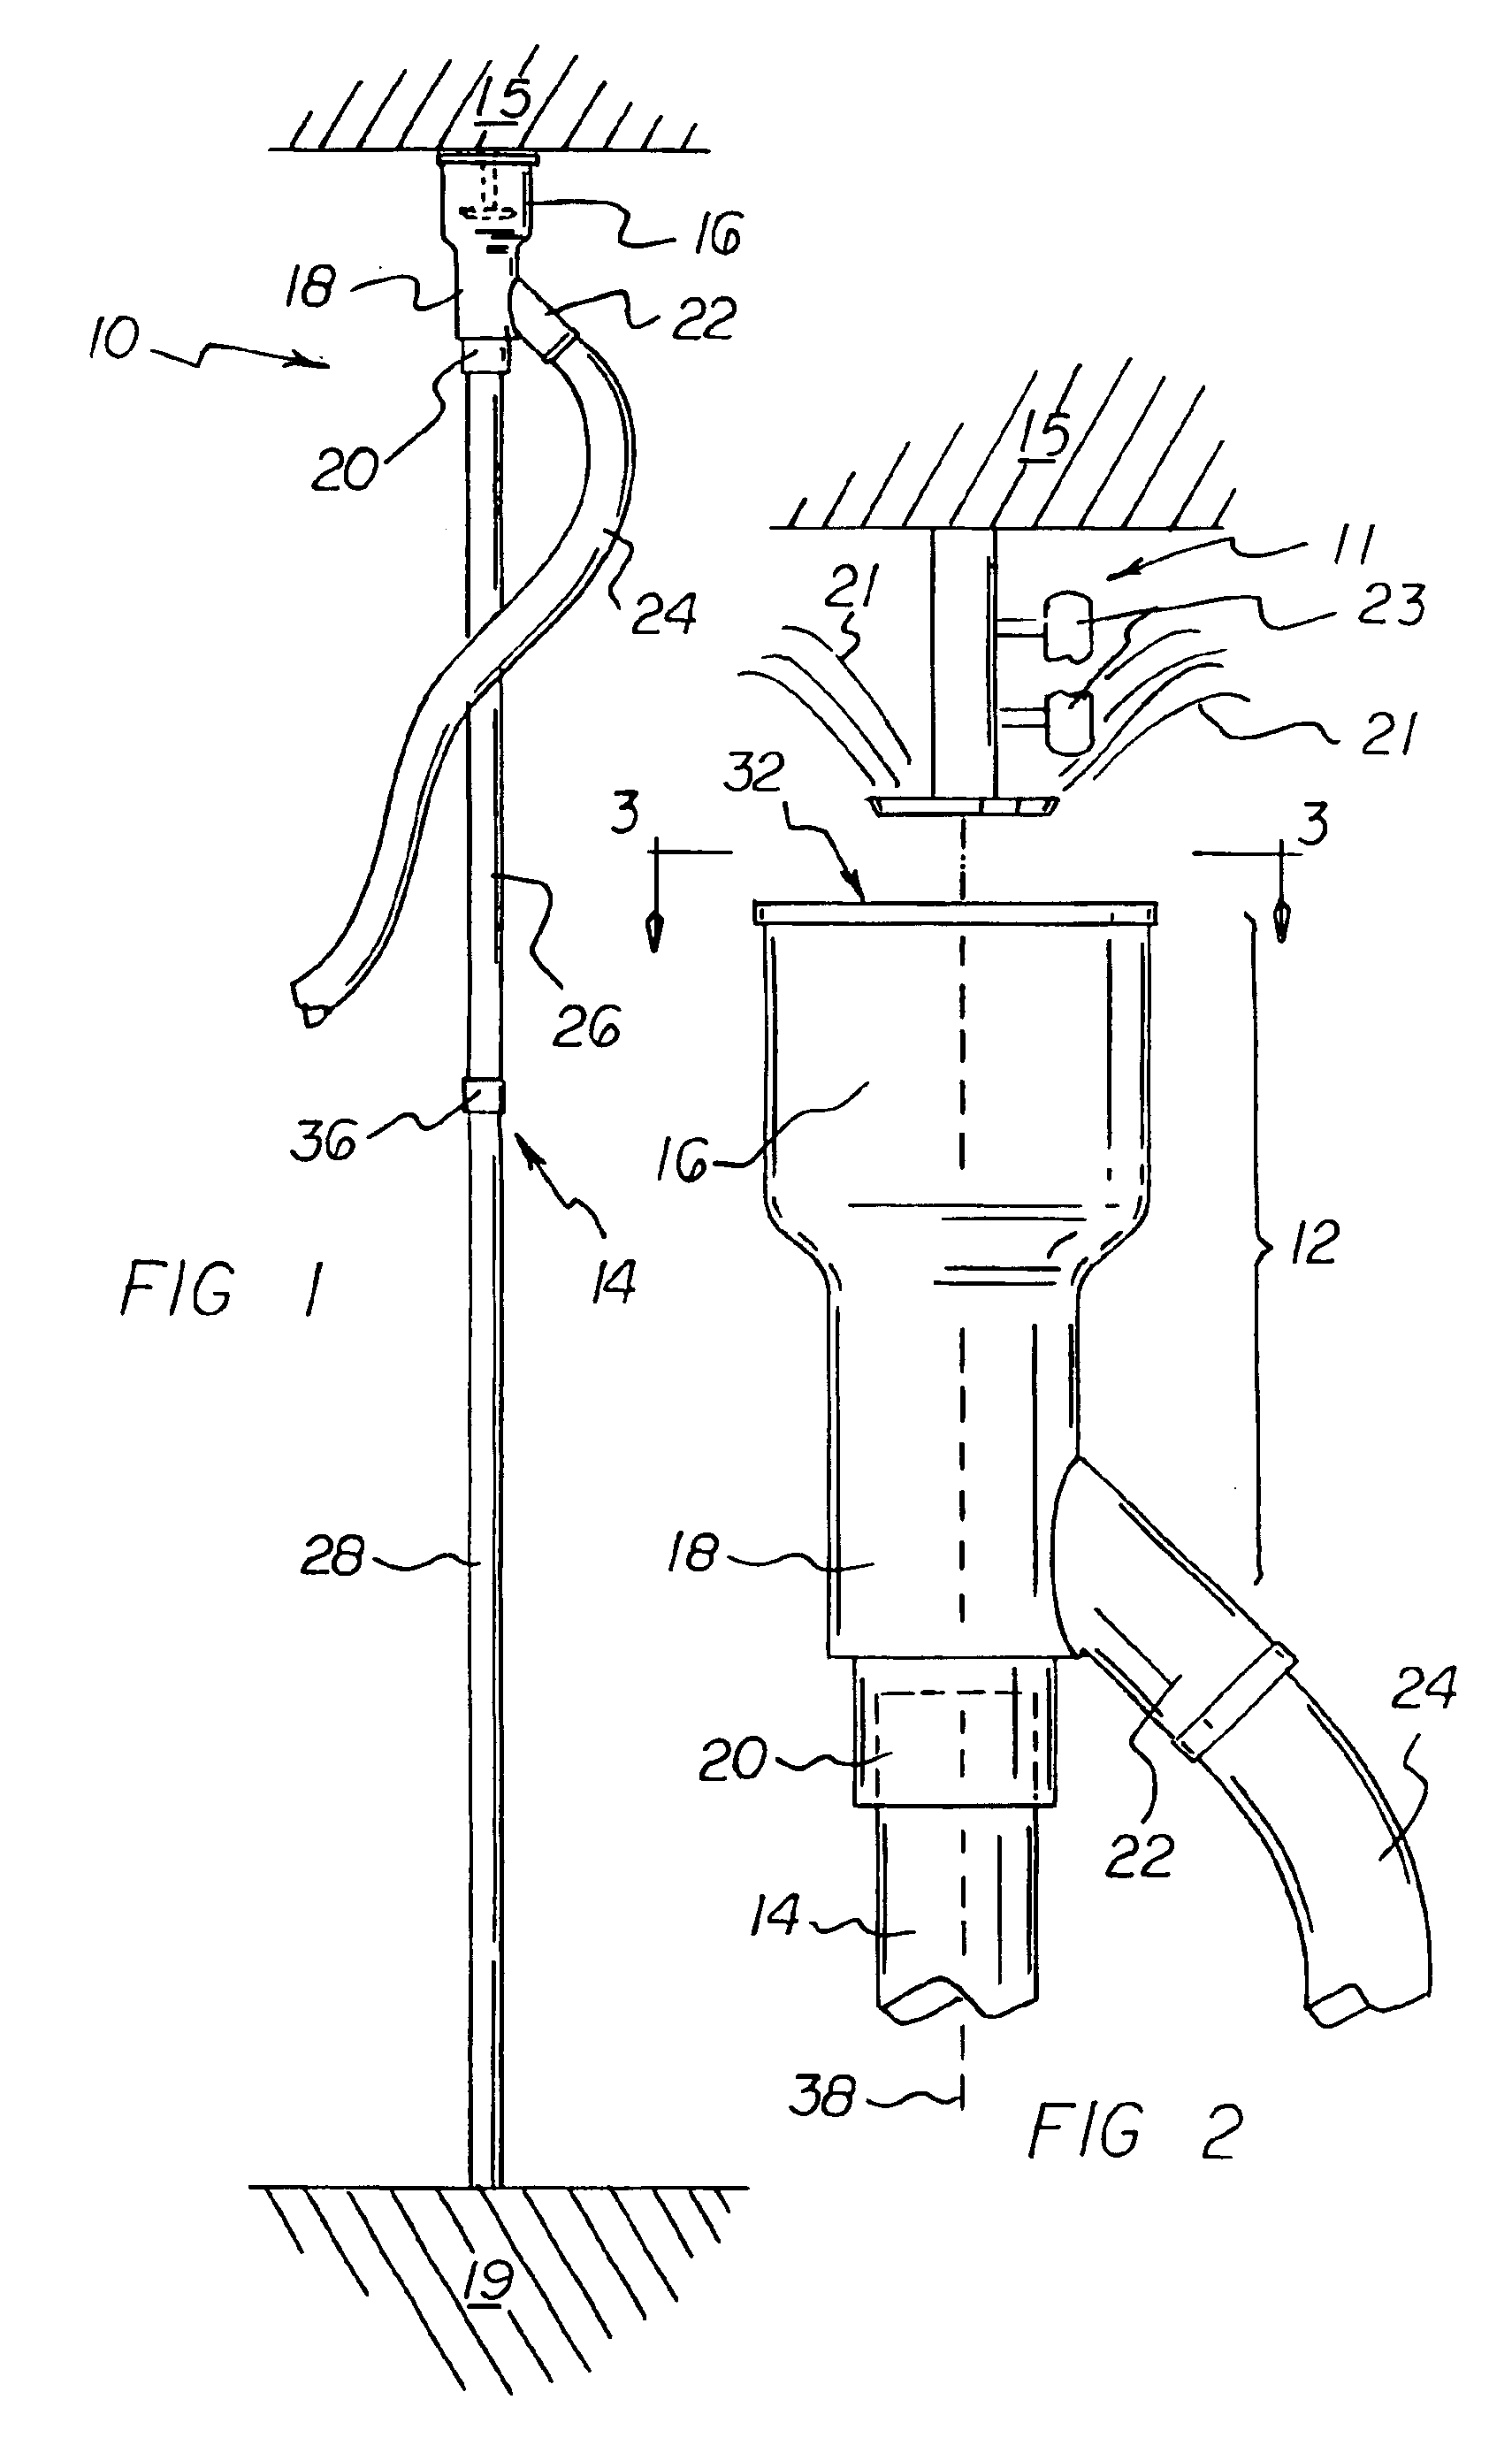 Fire sprinkler water catching apparatus